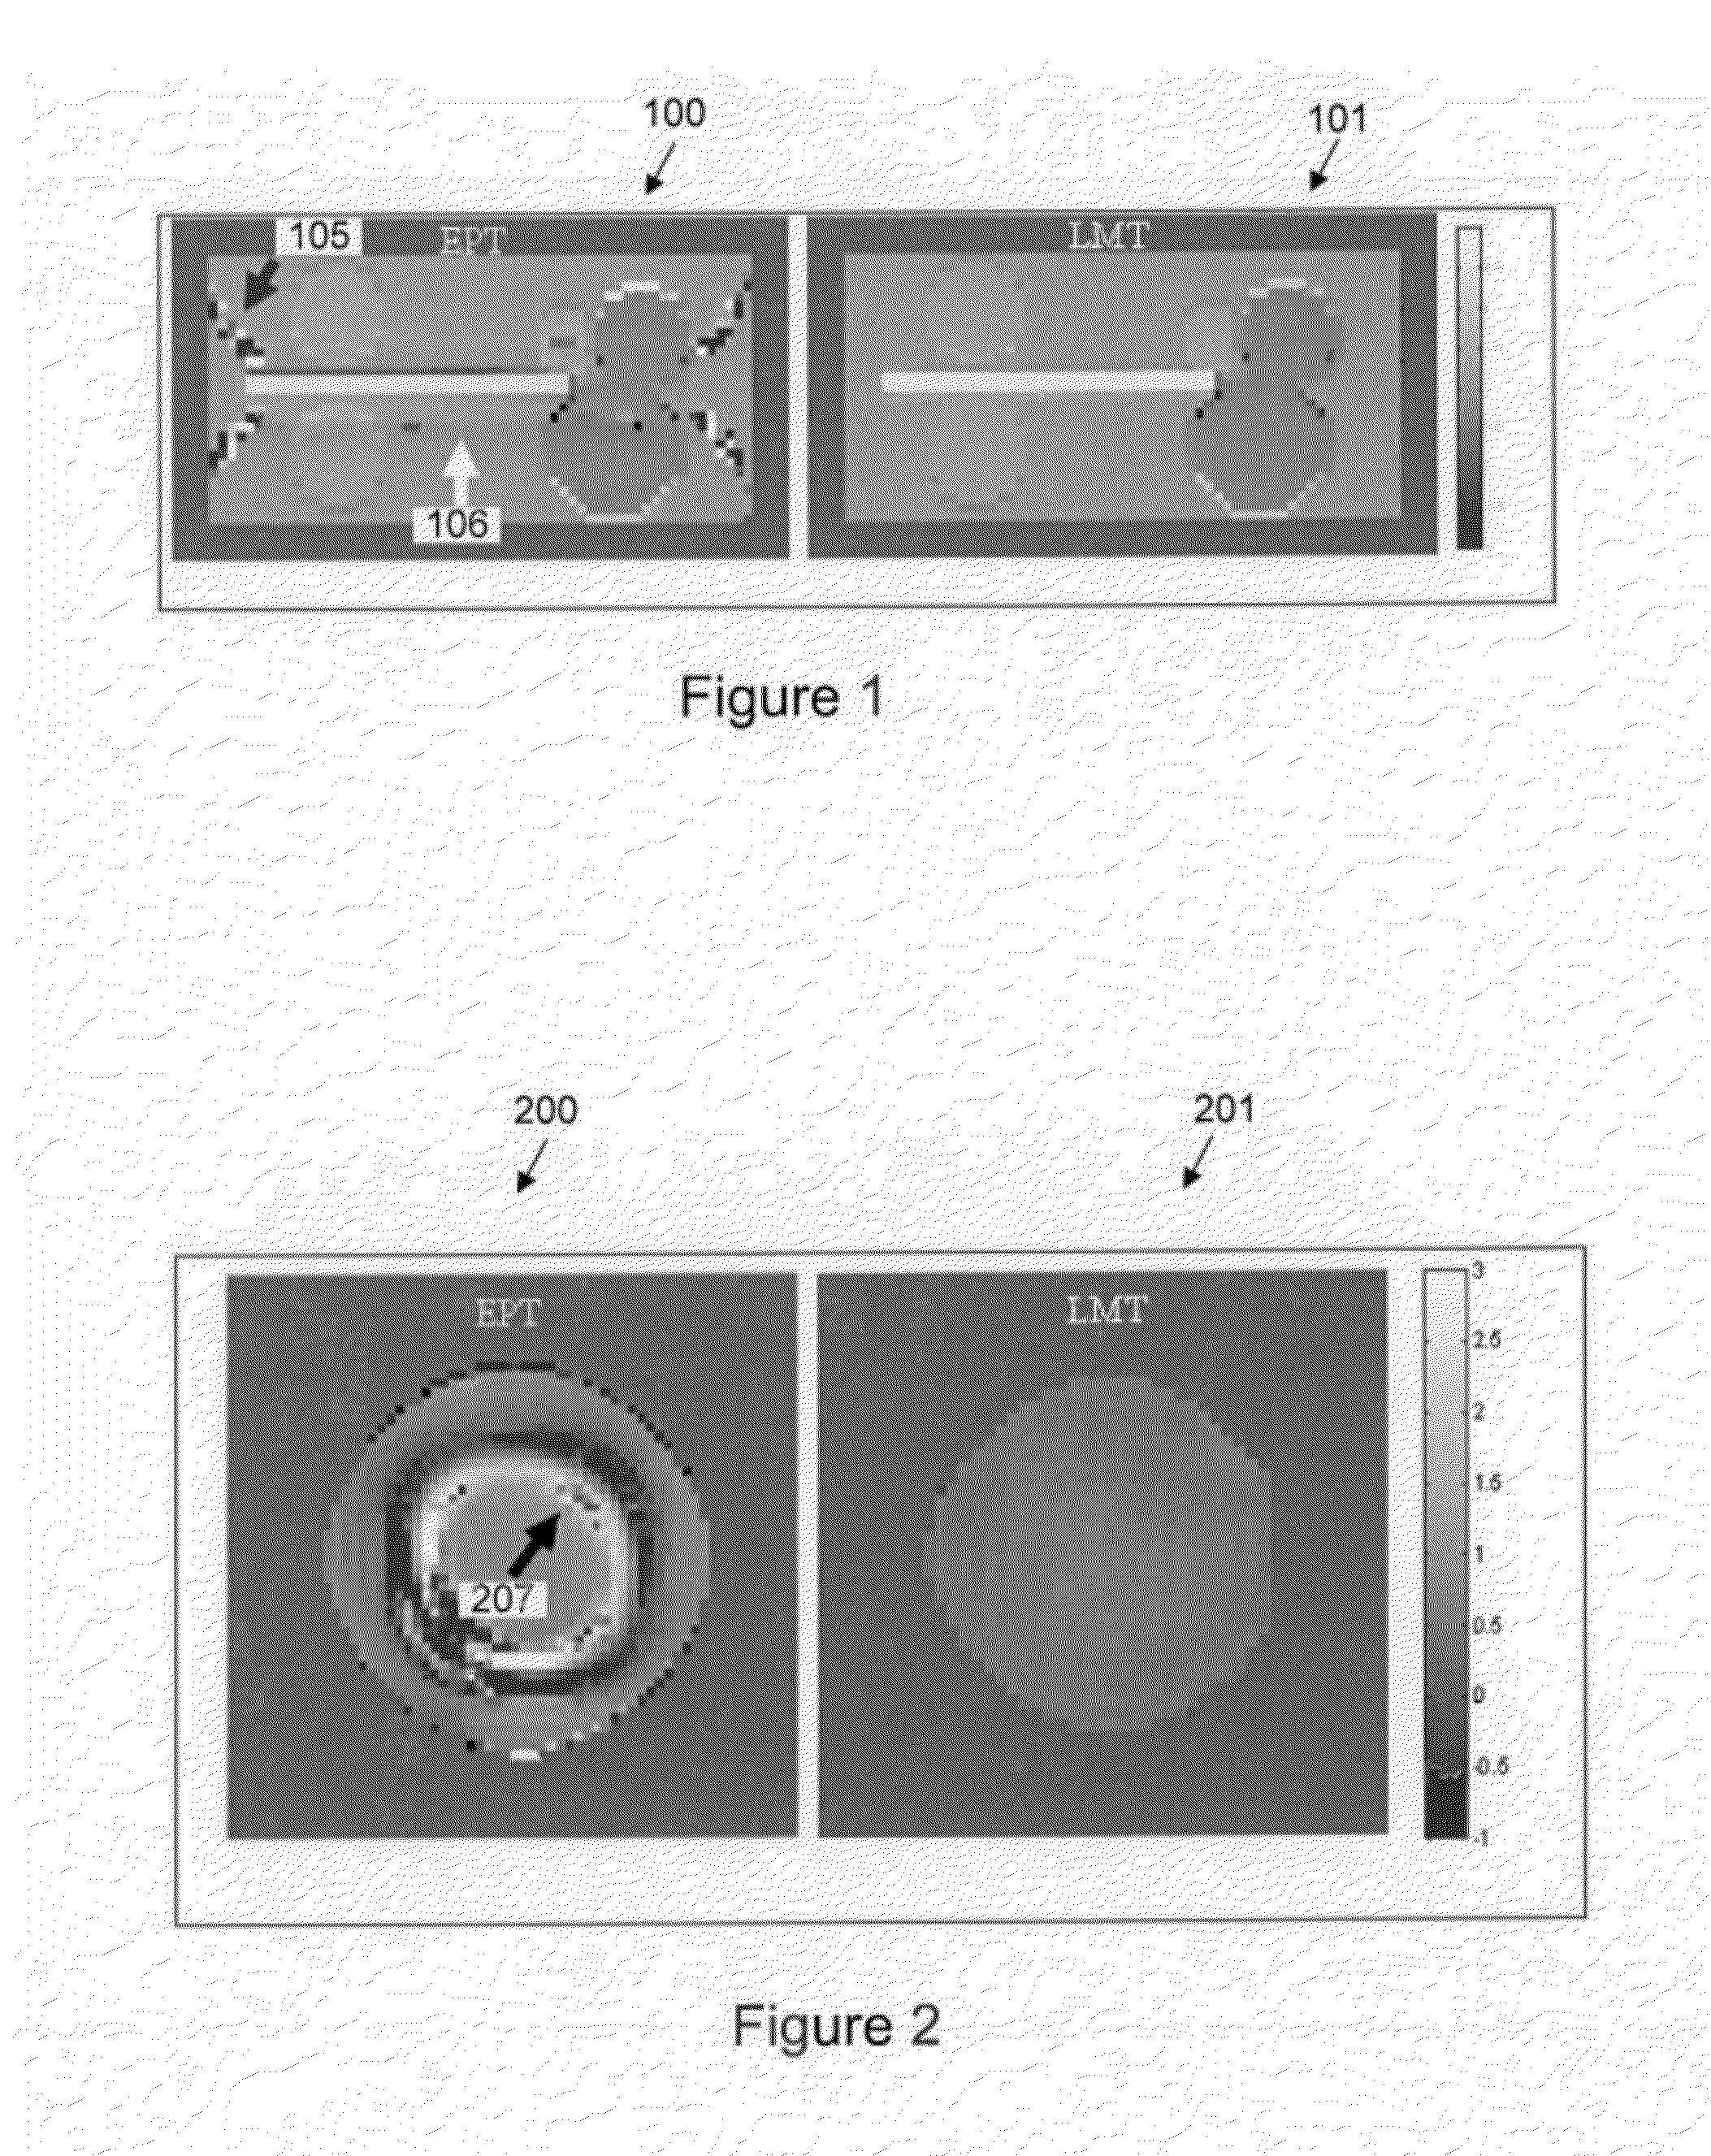 Apparatus, method and computer-accessible medium for noninvasive determination of electrical properties of tissues and materials